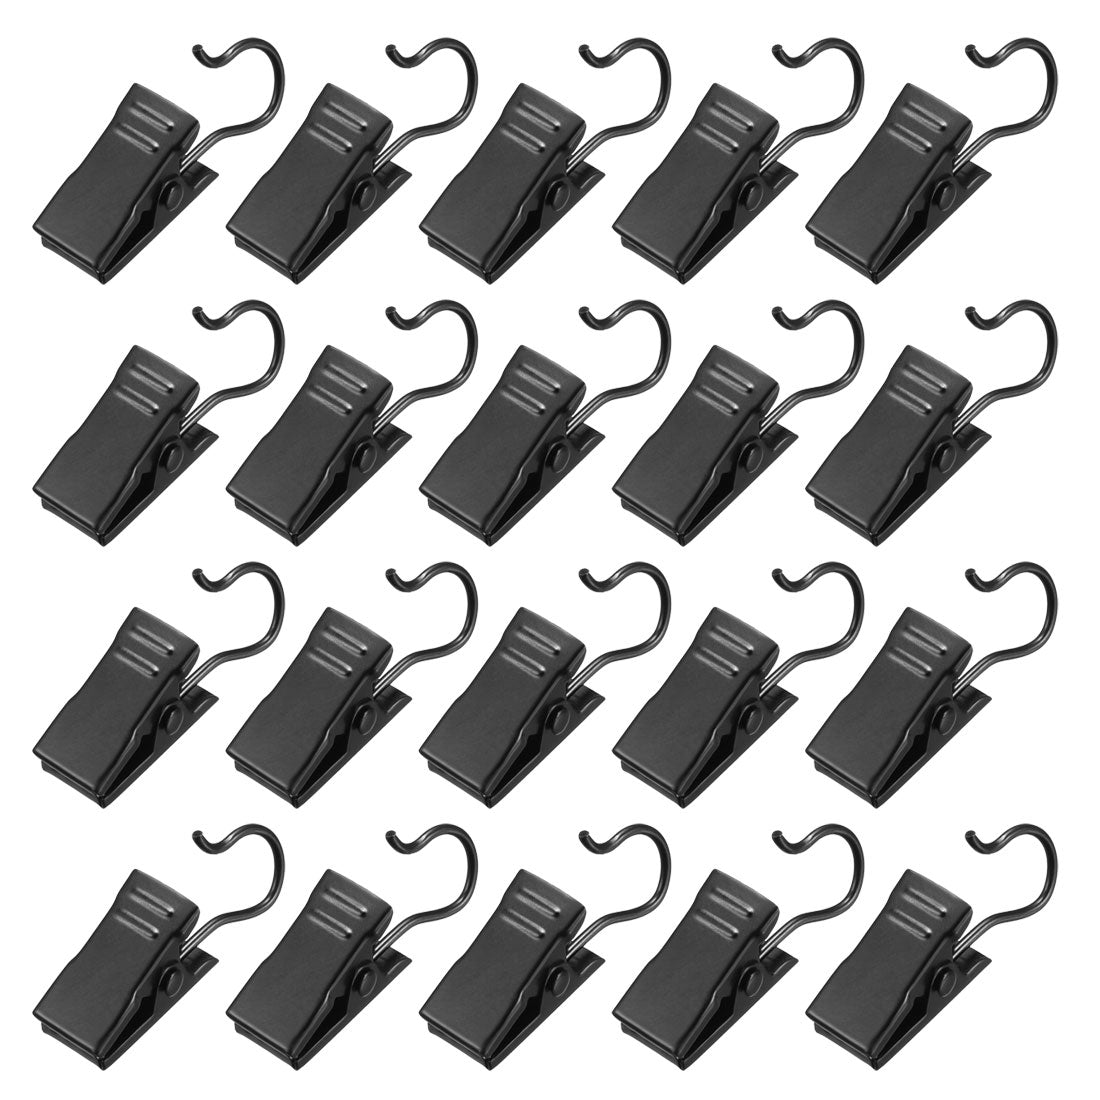 uxcell Uxcell Curtain Clip Hook Set Clips for Curtain Photos Home Decoration Art Craft Display 0.71"*0.35" Black 20pcs